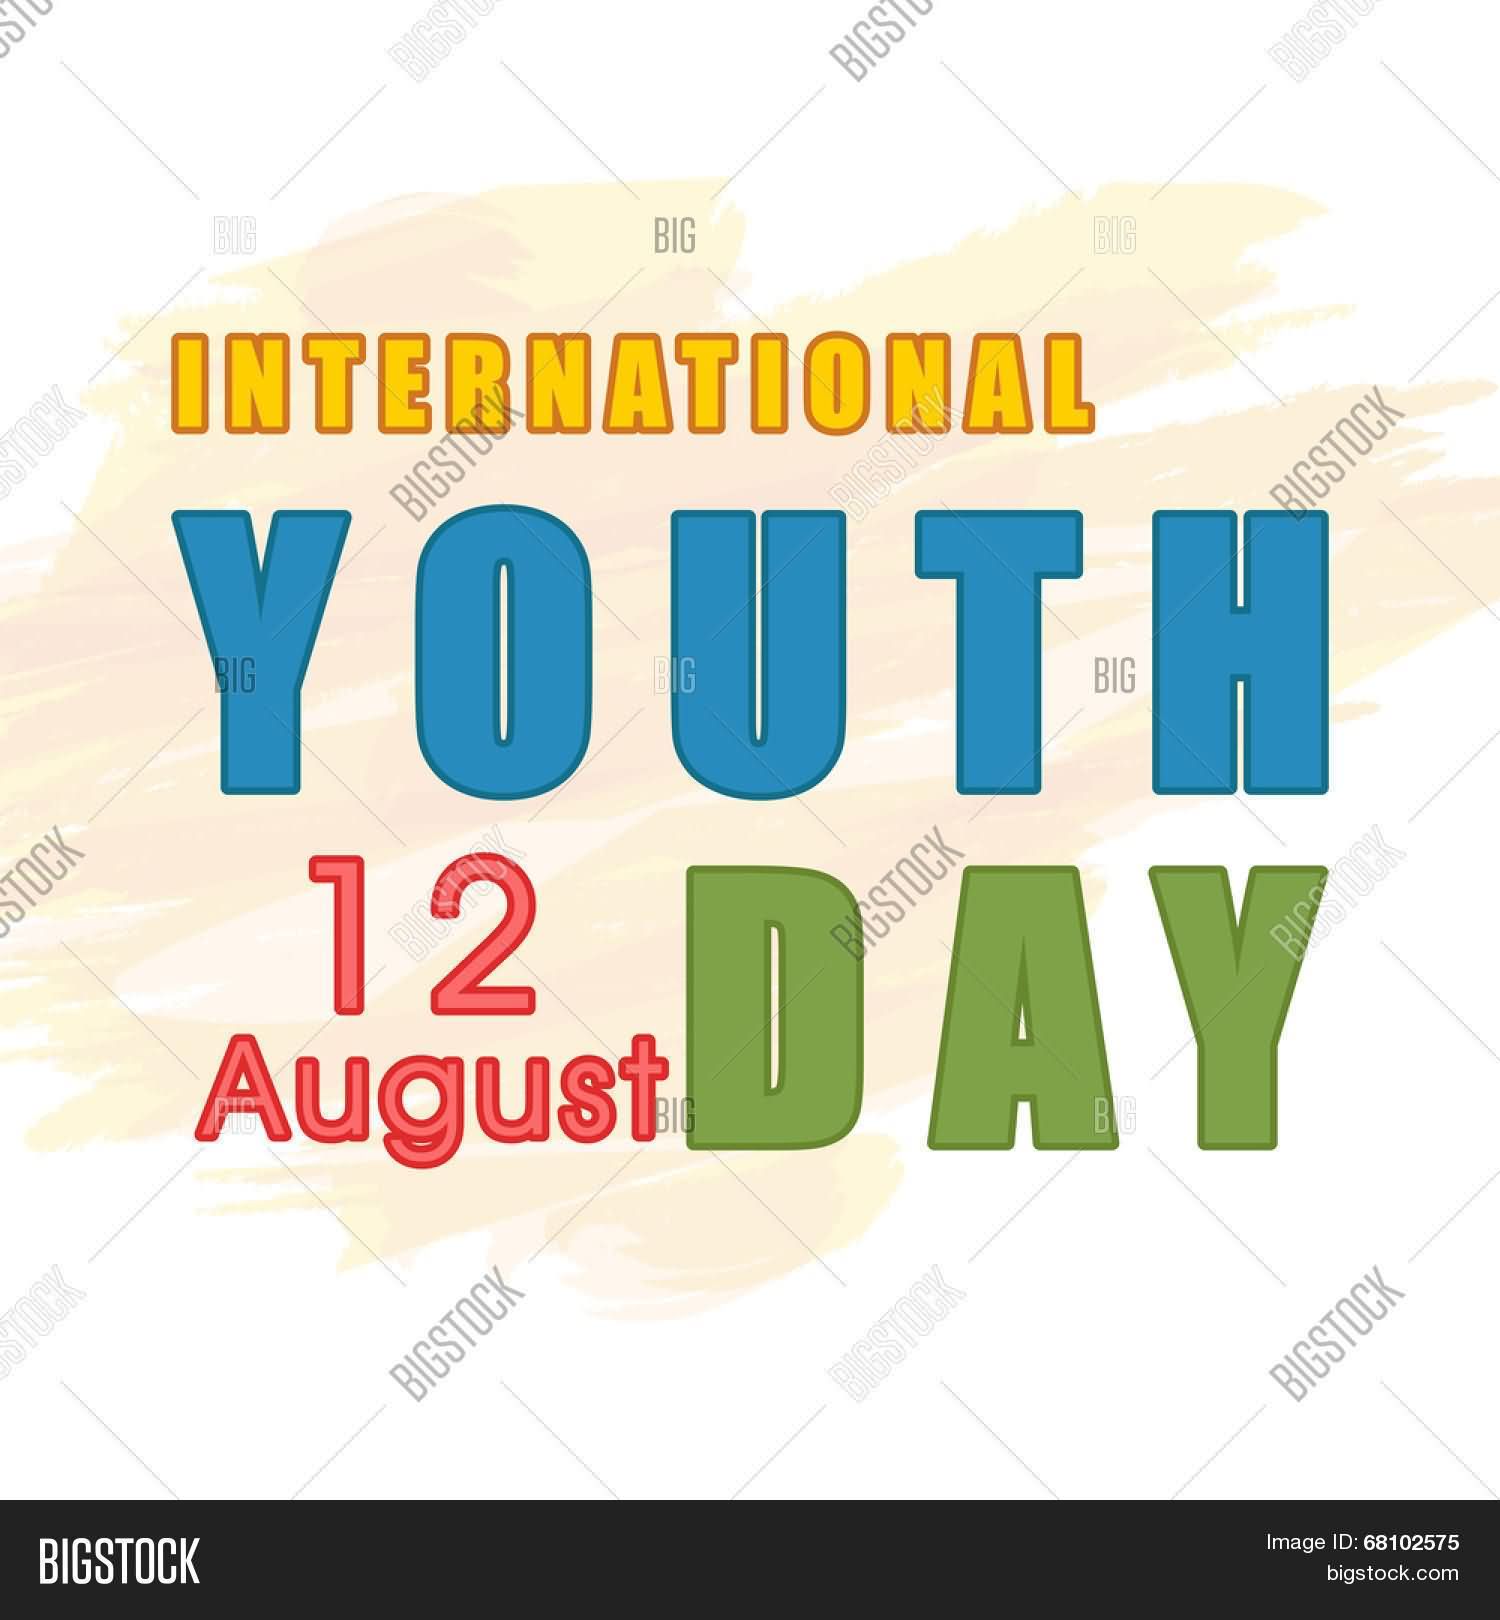 International Youth Day 12 August Colorful Illustration